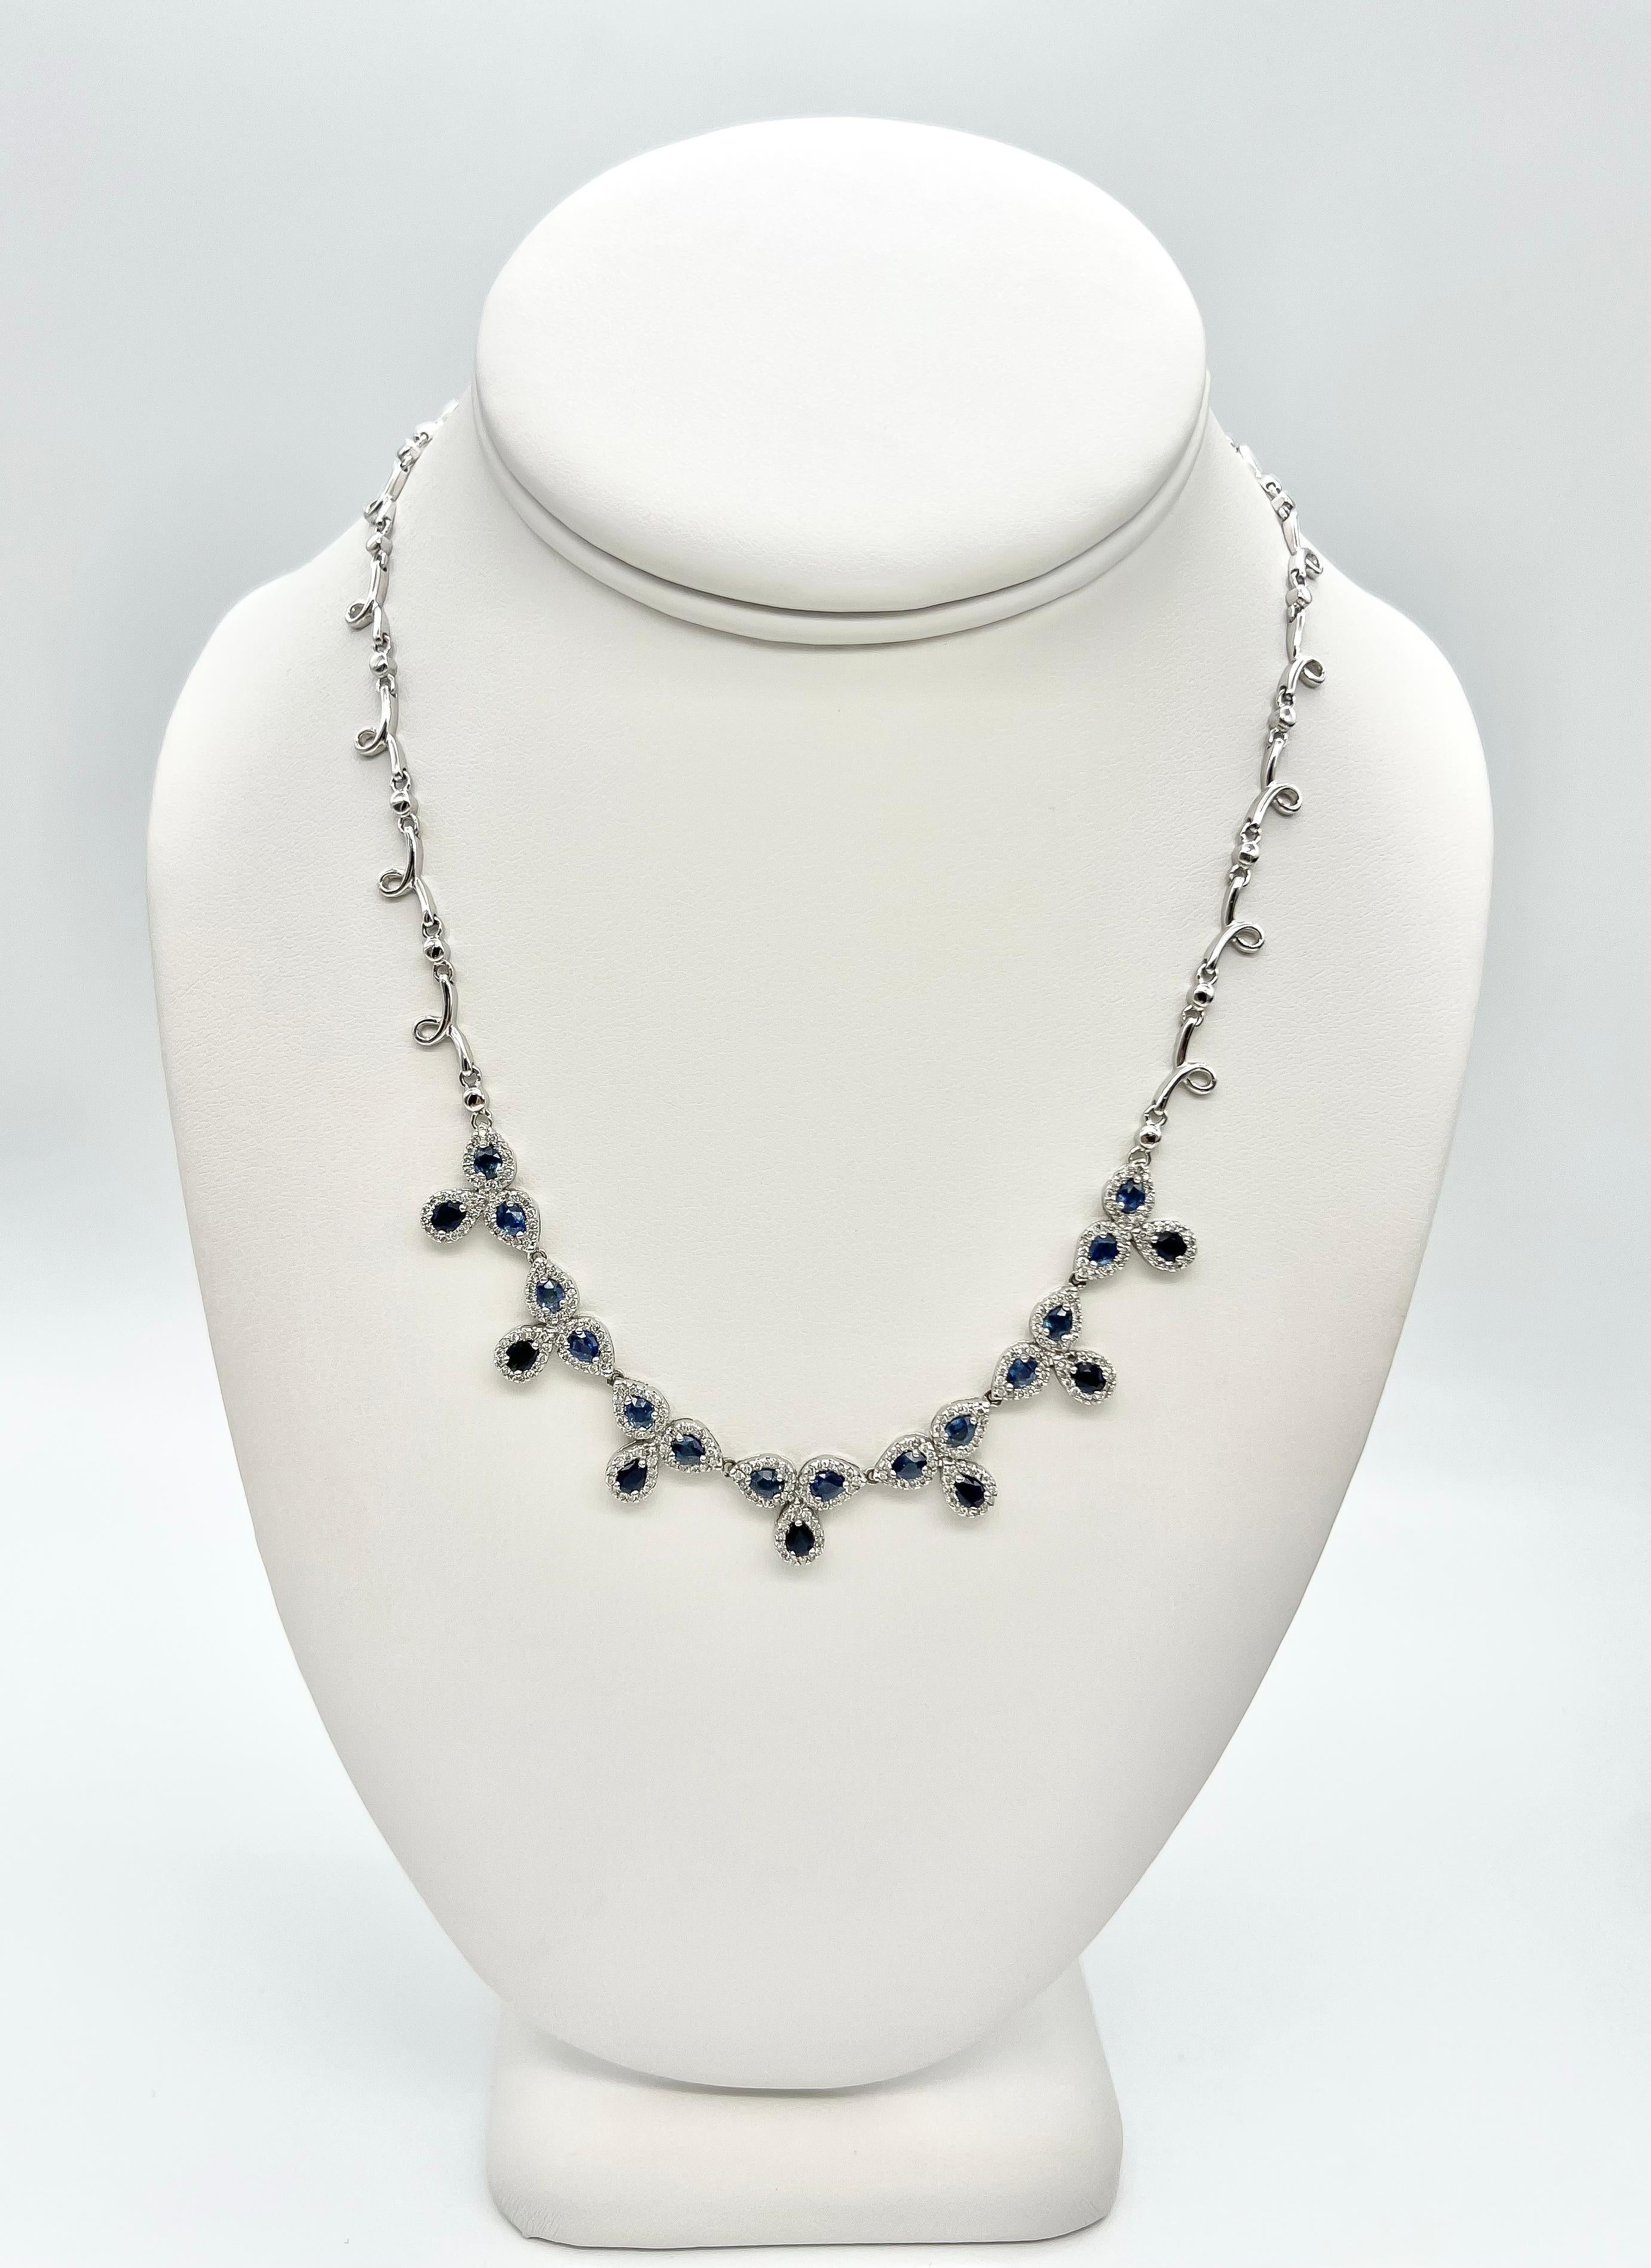 8.70 Total Carat Fancy Sapphire and Diamond, White Gold Necklace

Intricately crafted sapphire diamond necklace. This necklace boasts a total of 6.00 Carat pear shape Sapphires juxtaposed in trios. Each of these sapphire clusters is surrounded with